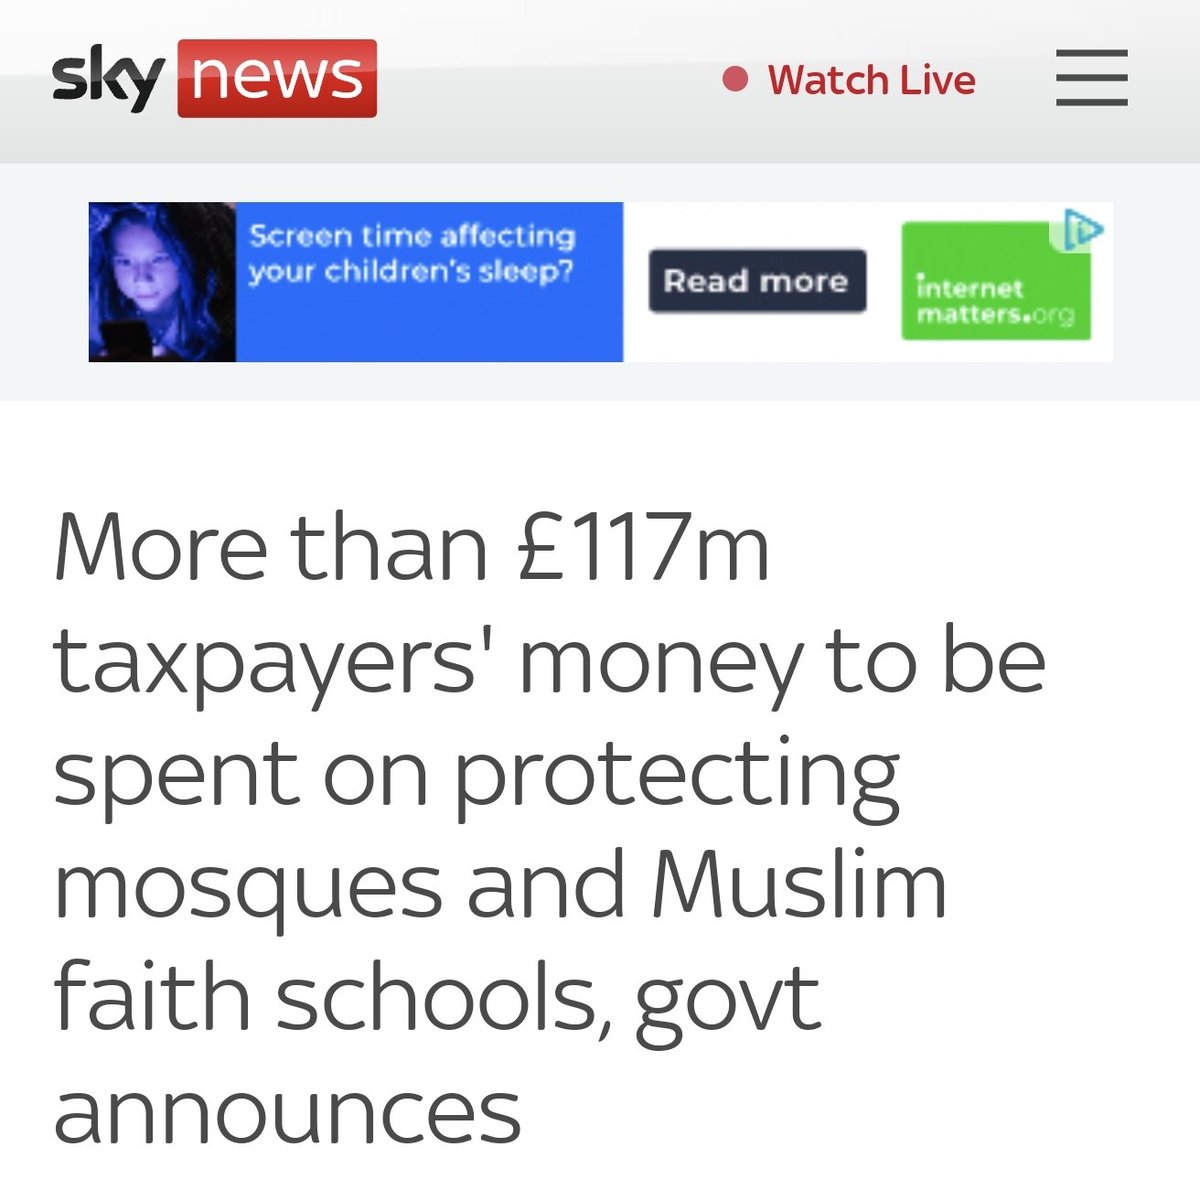 How does @SkyNews justify this disparity in headlines? Why is support for security for Muslim institutions not framed in the same way as support for security for Jewish institutions? Really unacceptable.